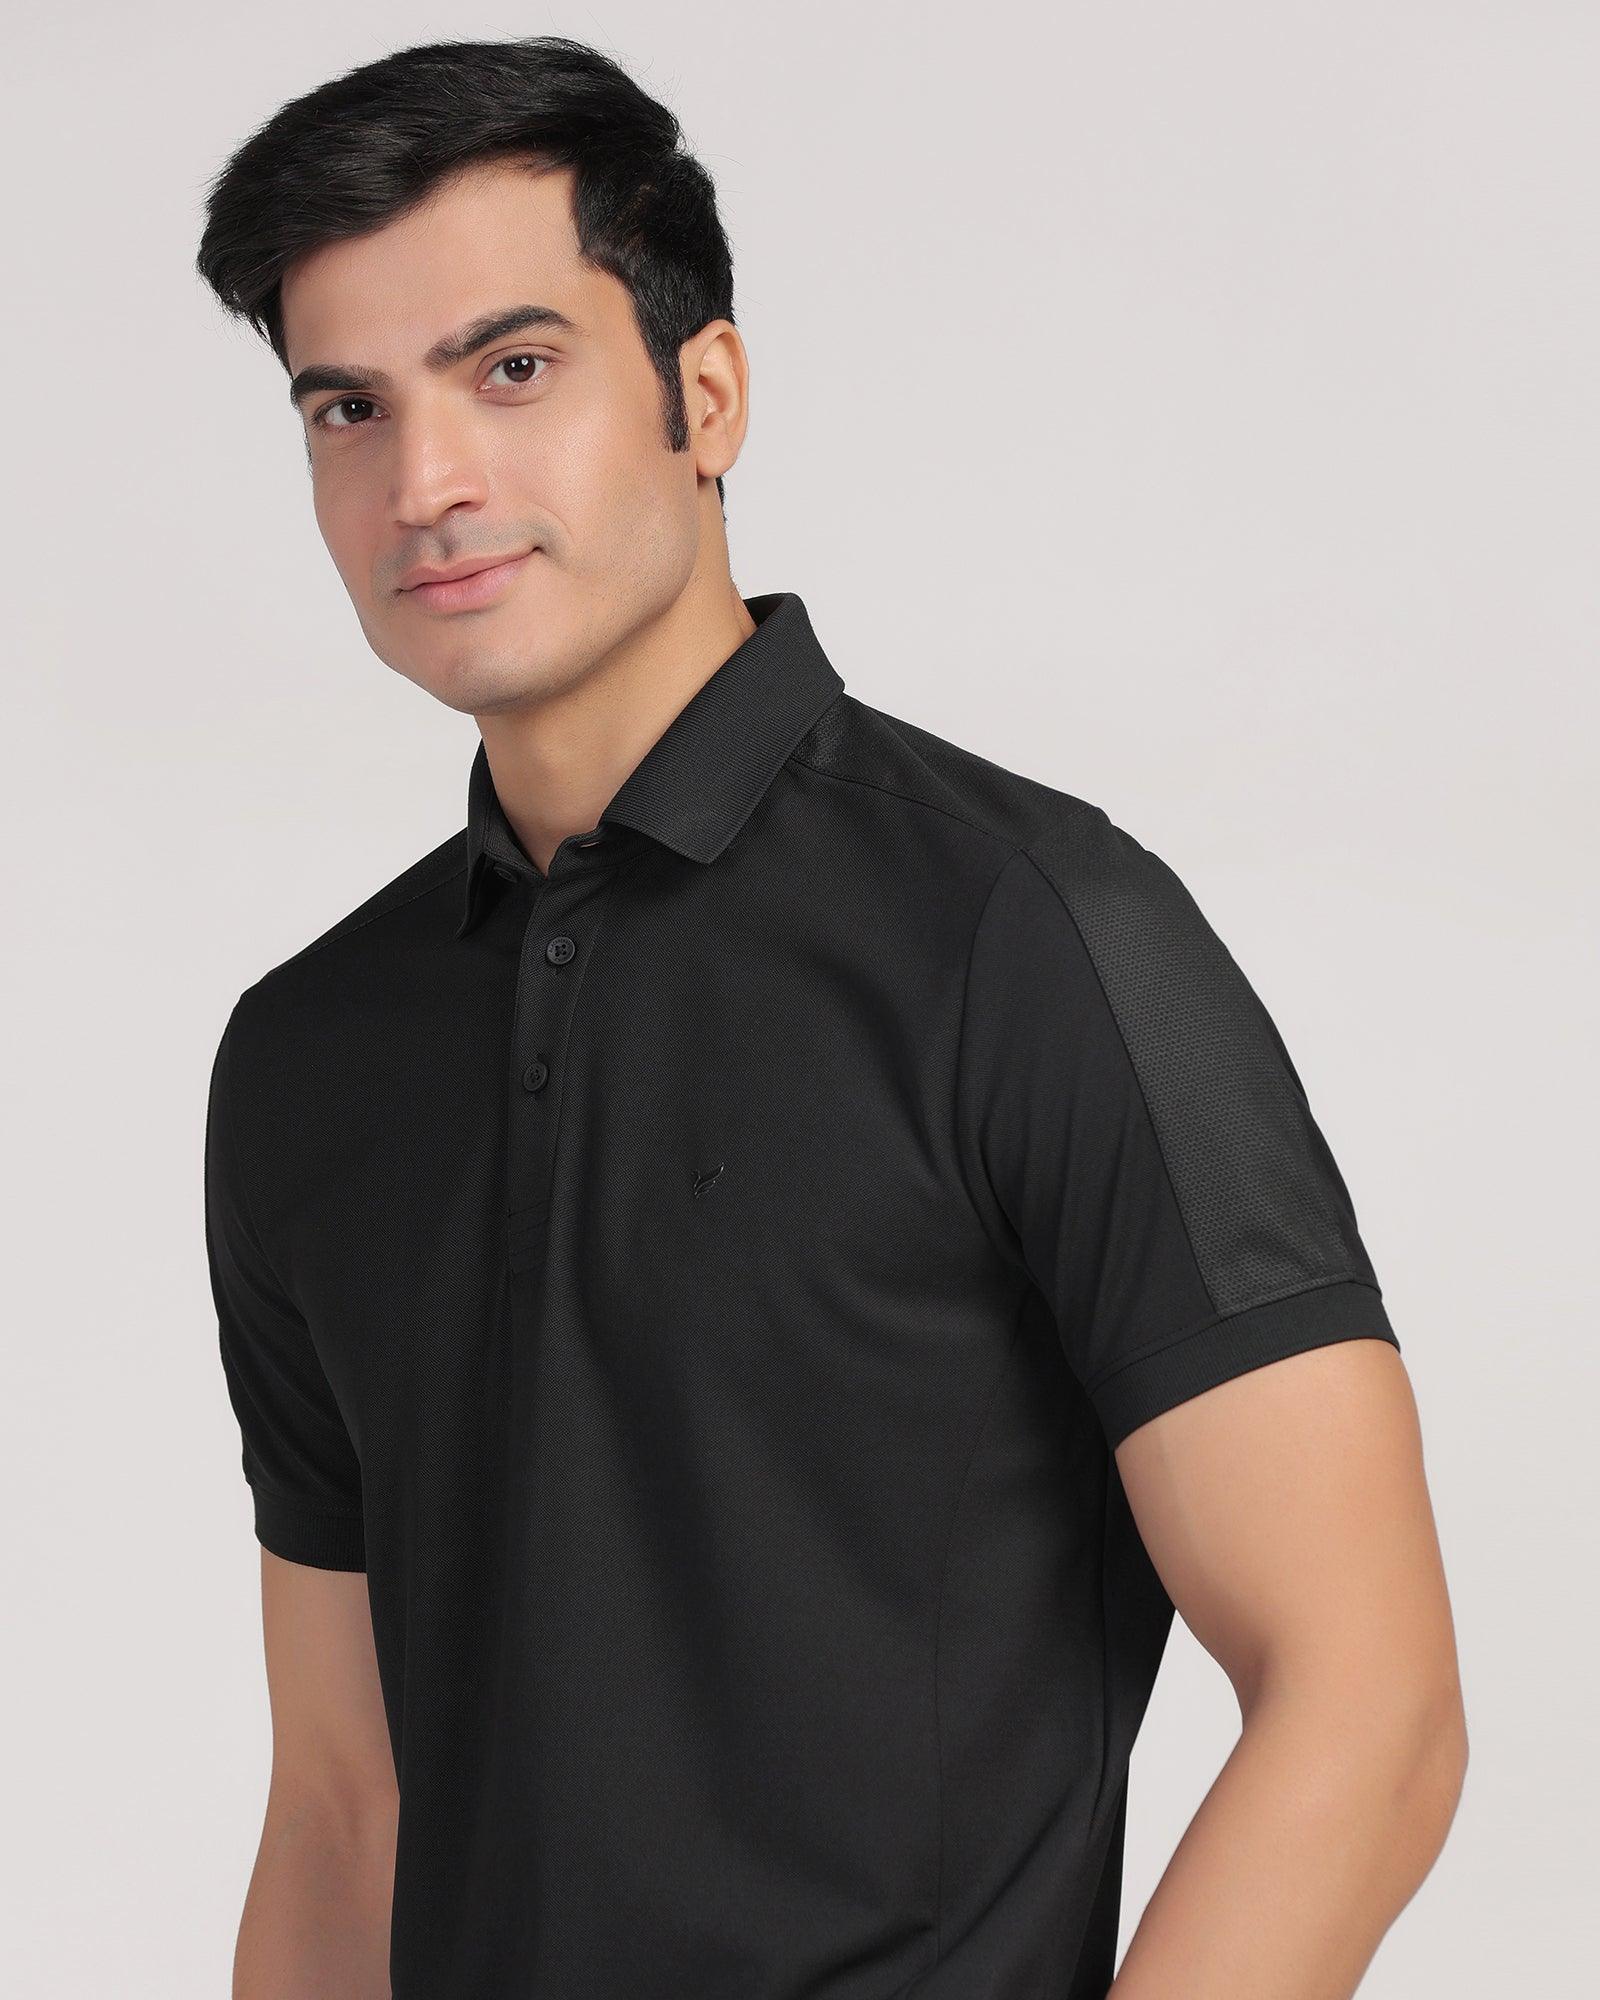 TechPro Polo Black Solid T-Shirt - Lewis